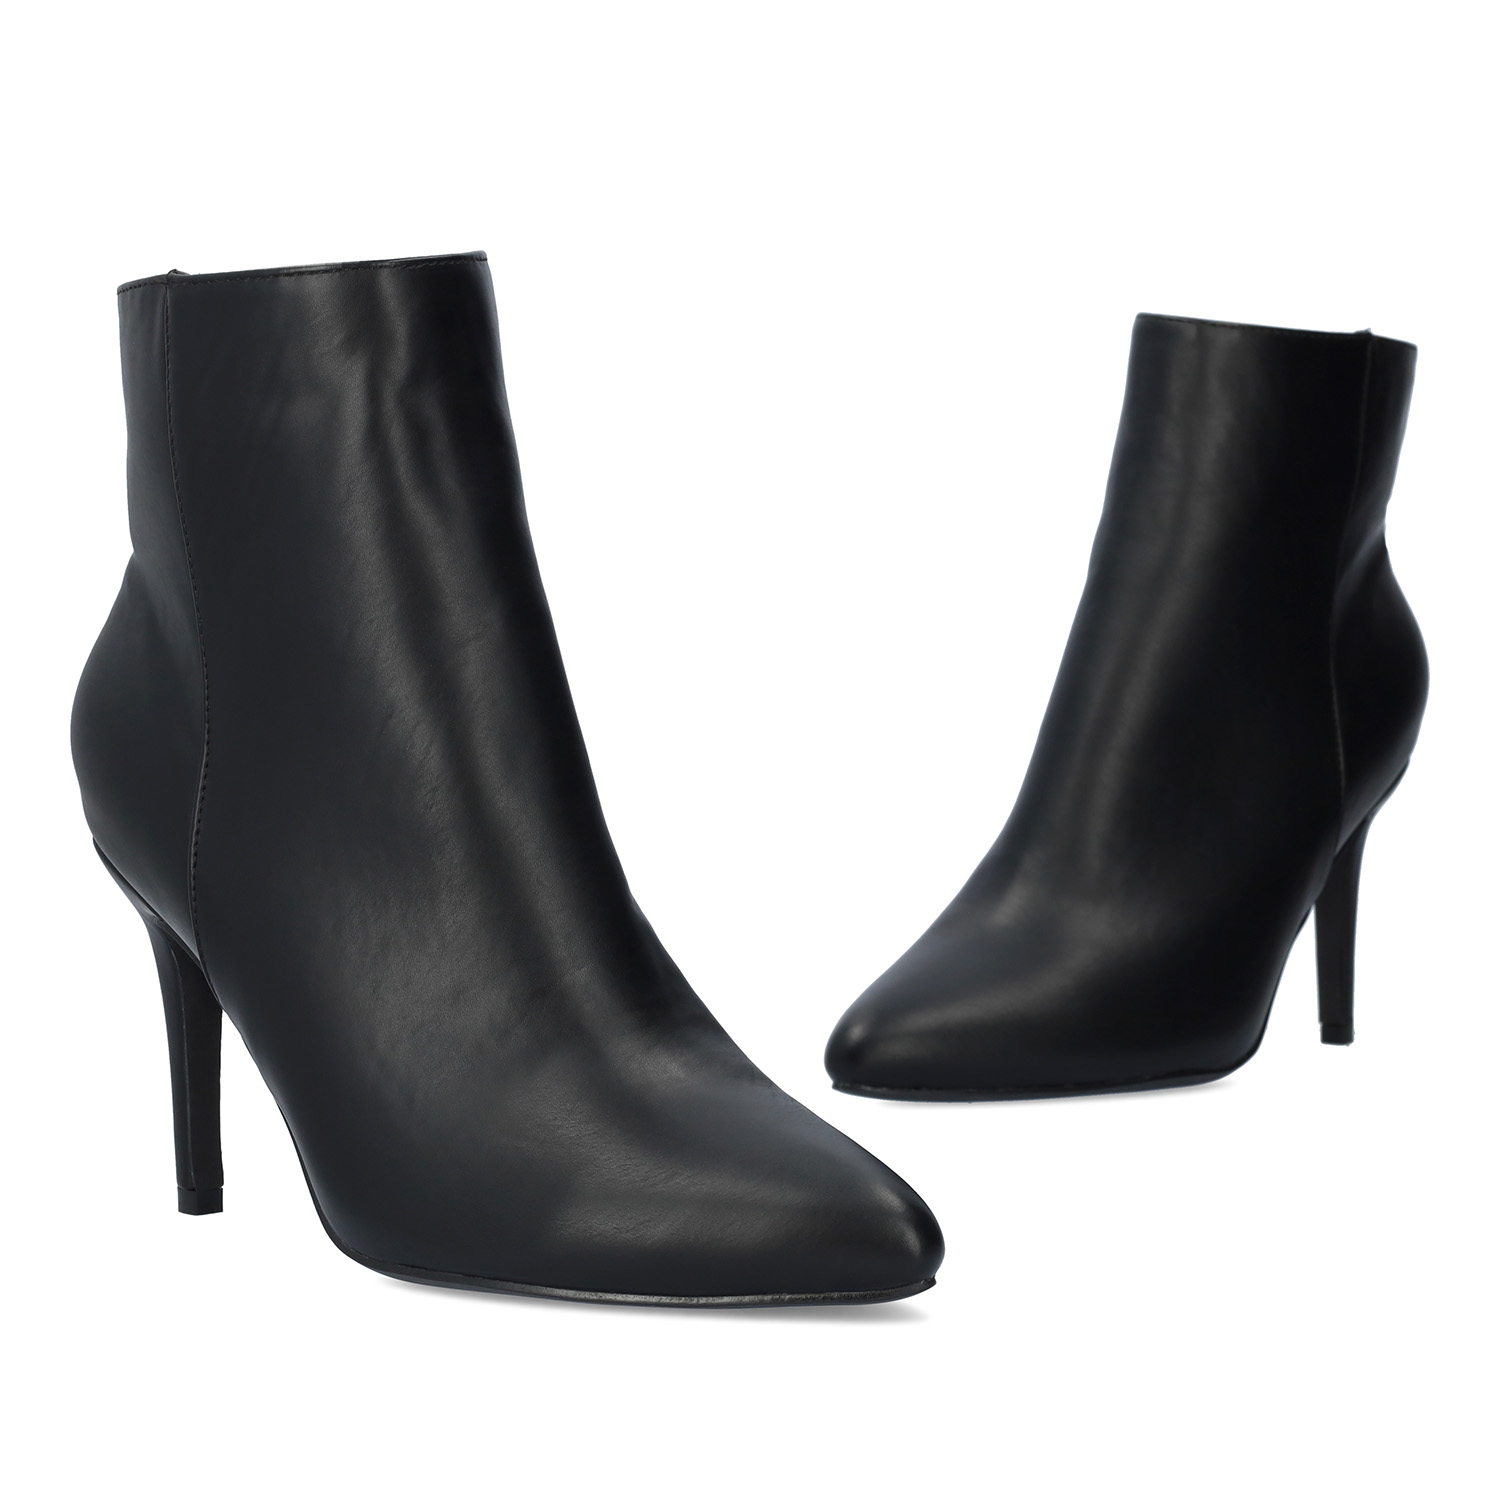 High-heeled booties in black faux leather 